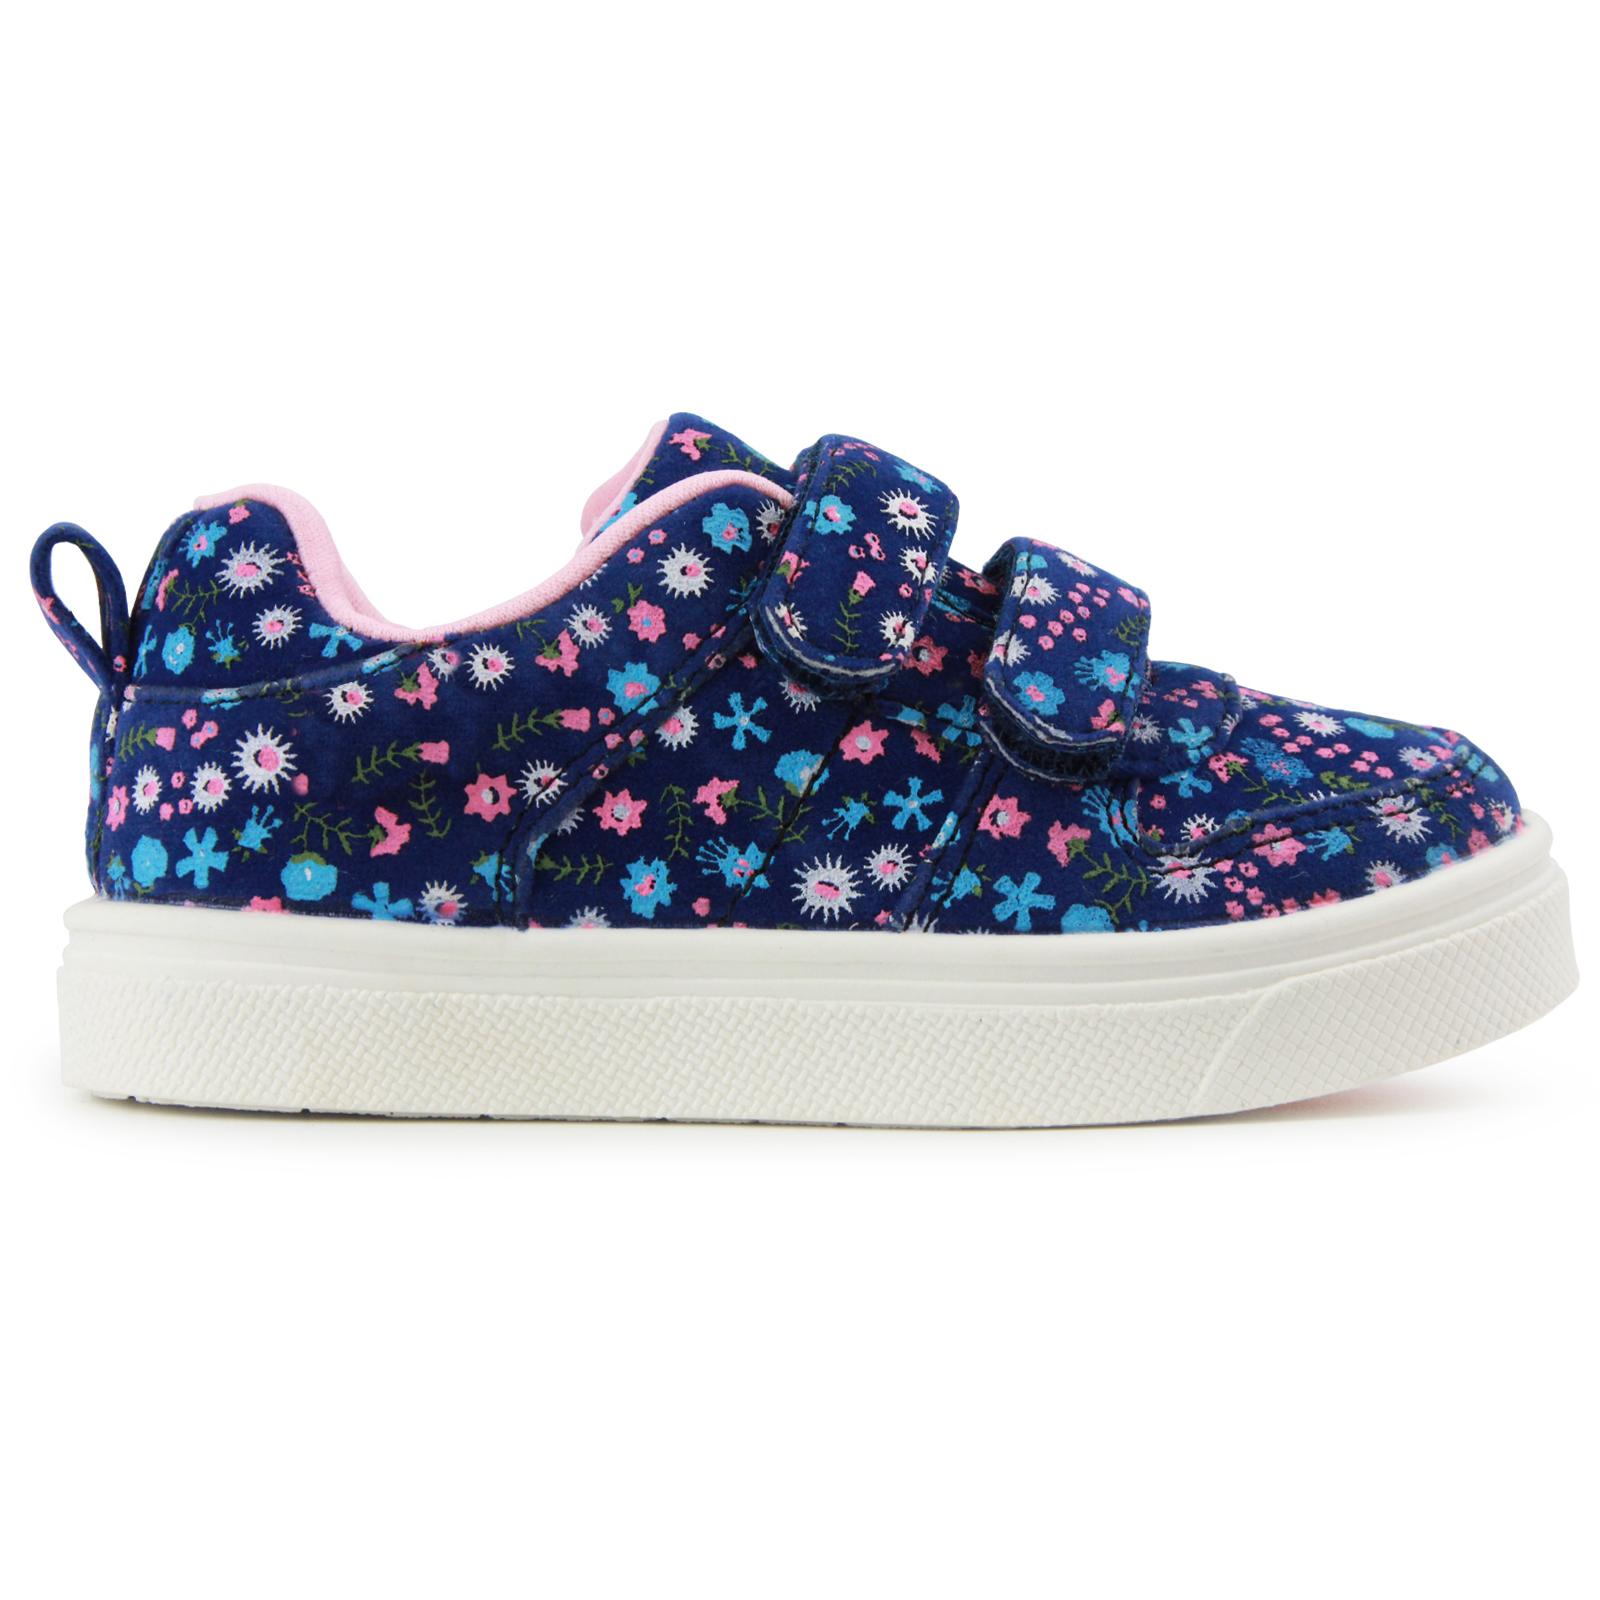 Oomphies Girls' Champ Blue/Floral Sneaker